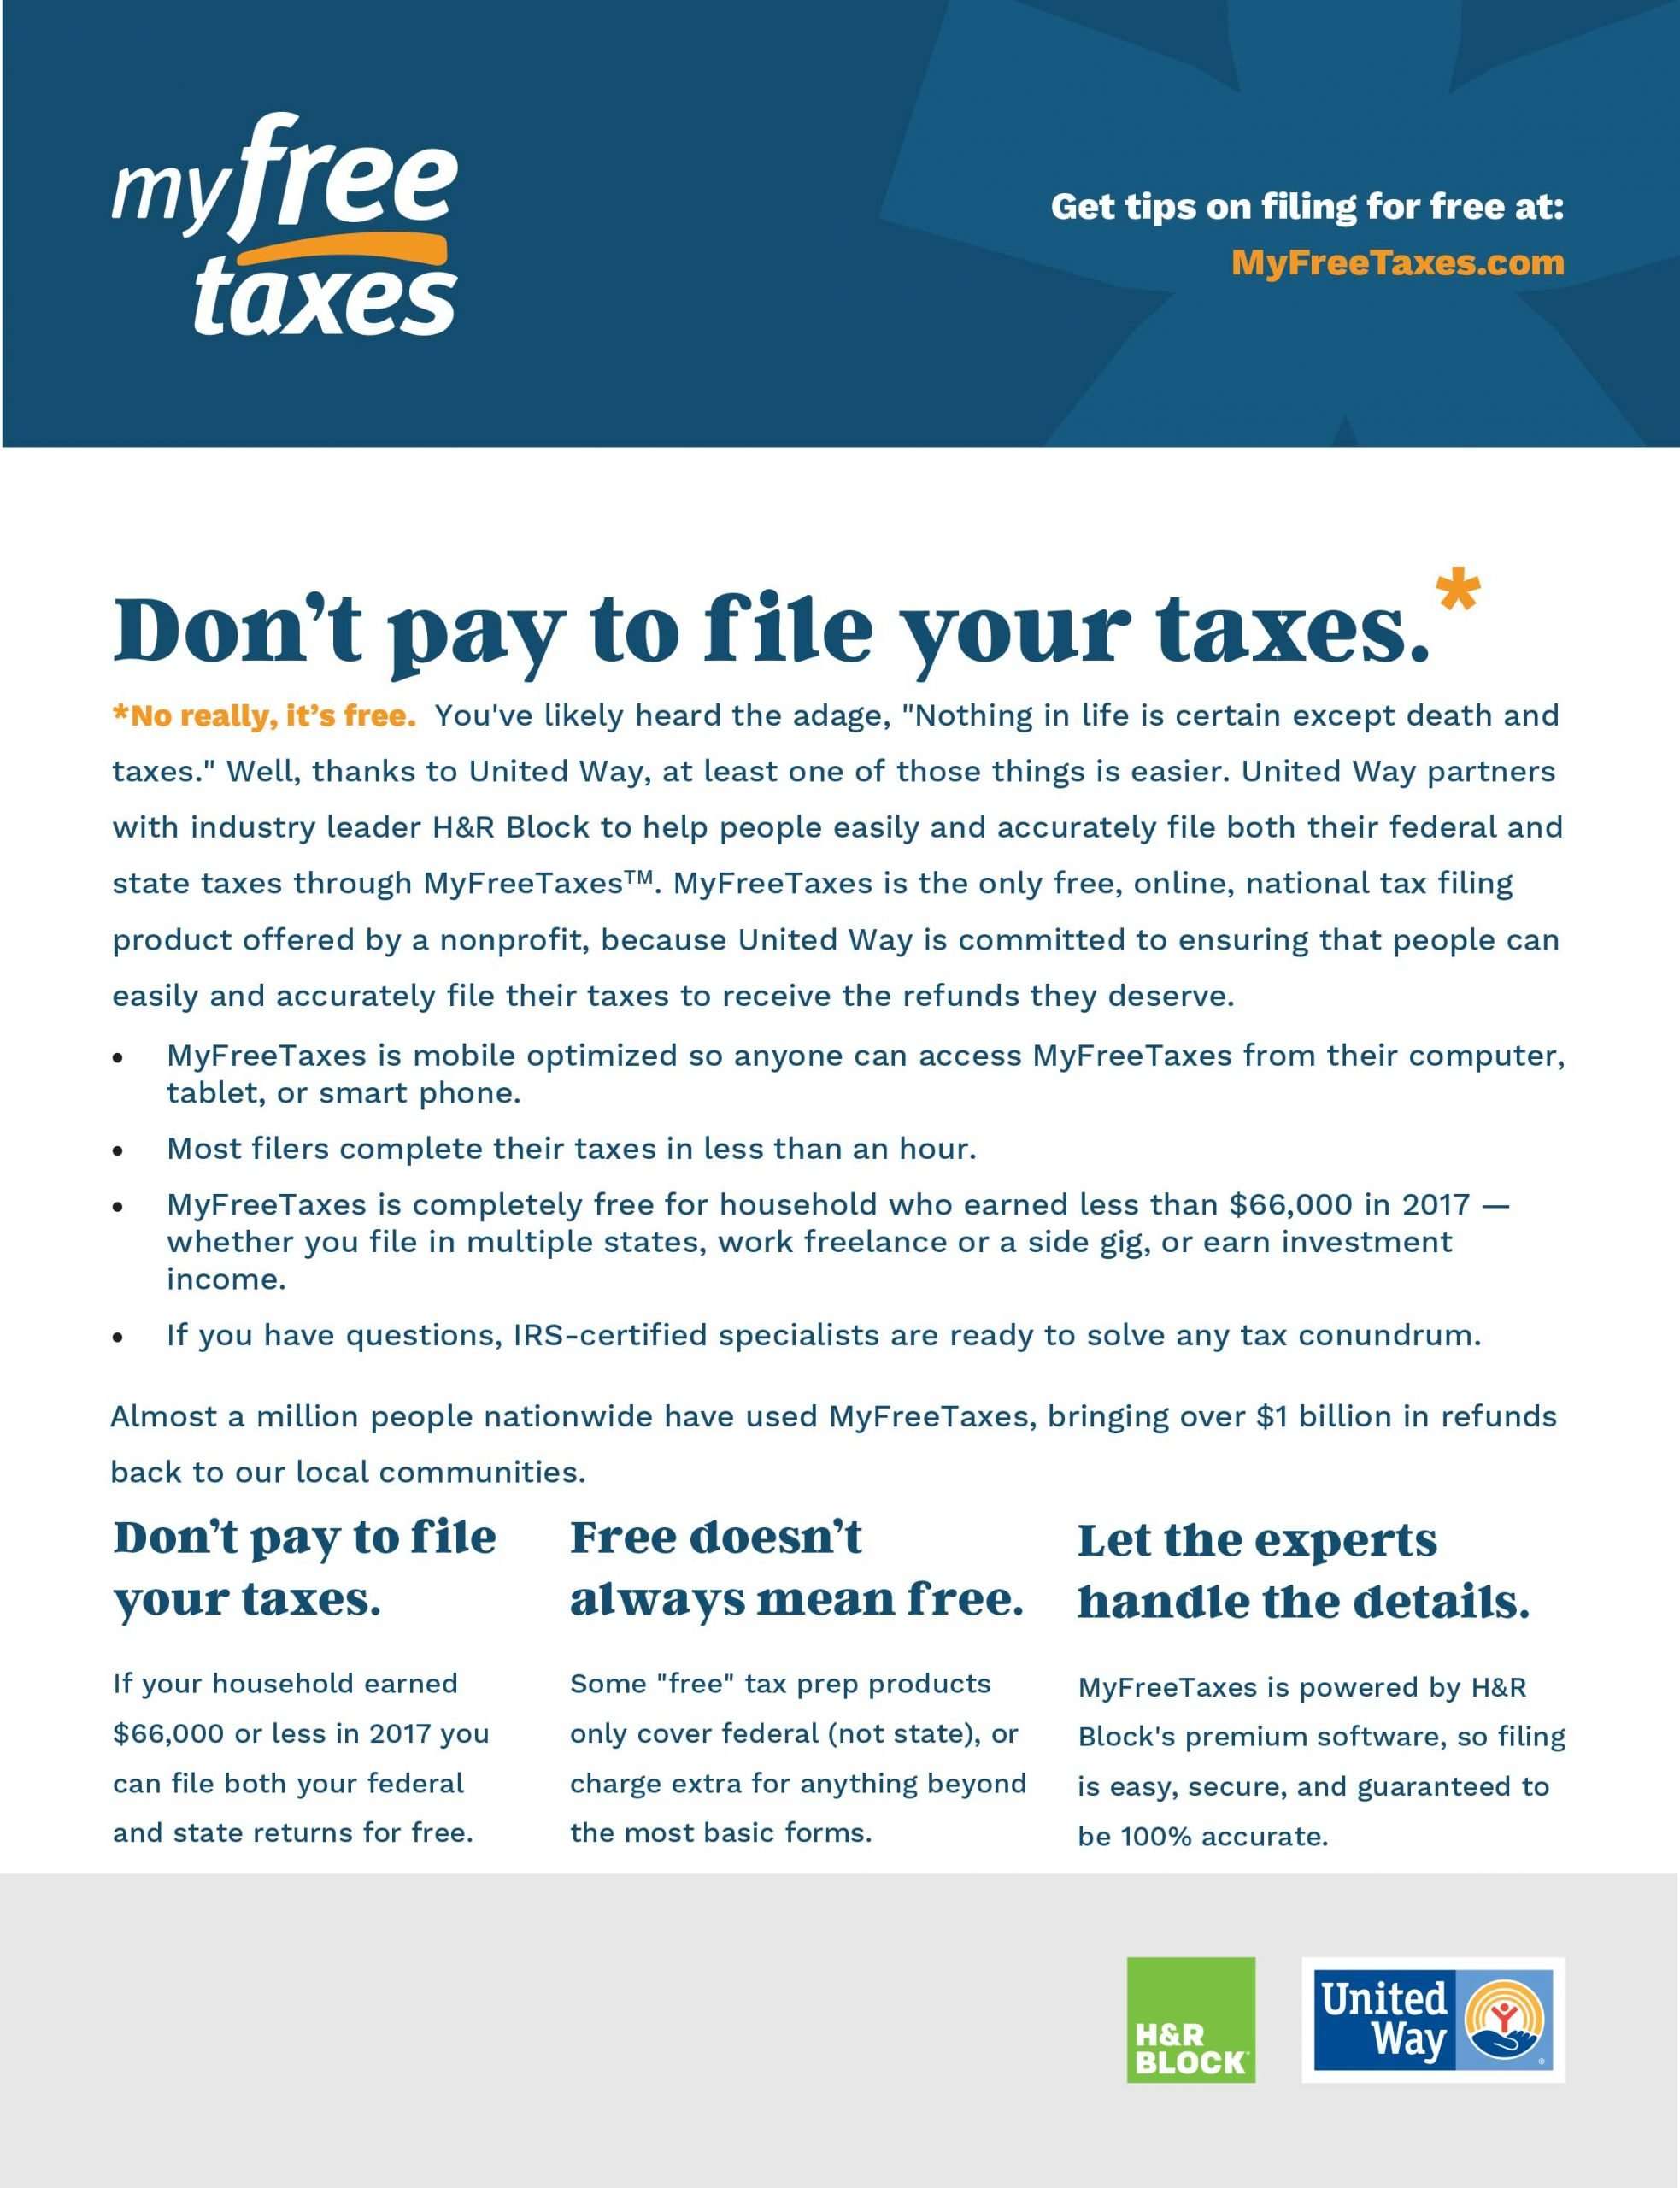 File your 2017 taxes for free.